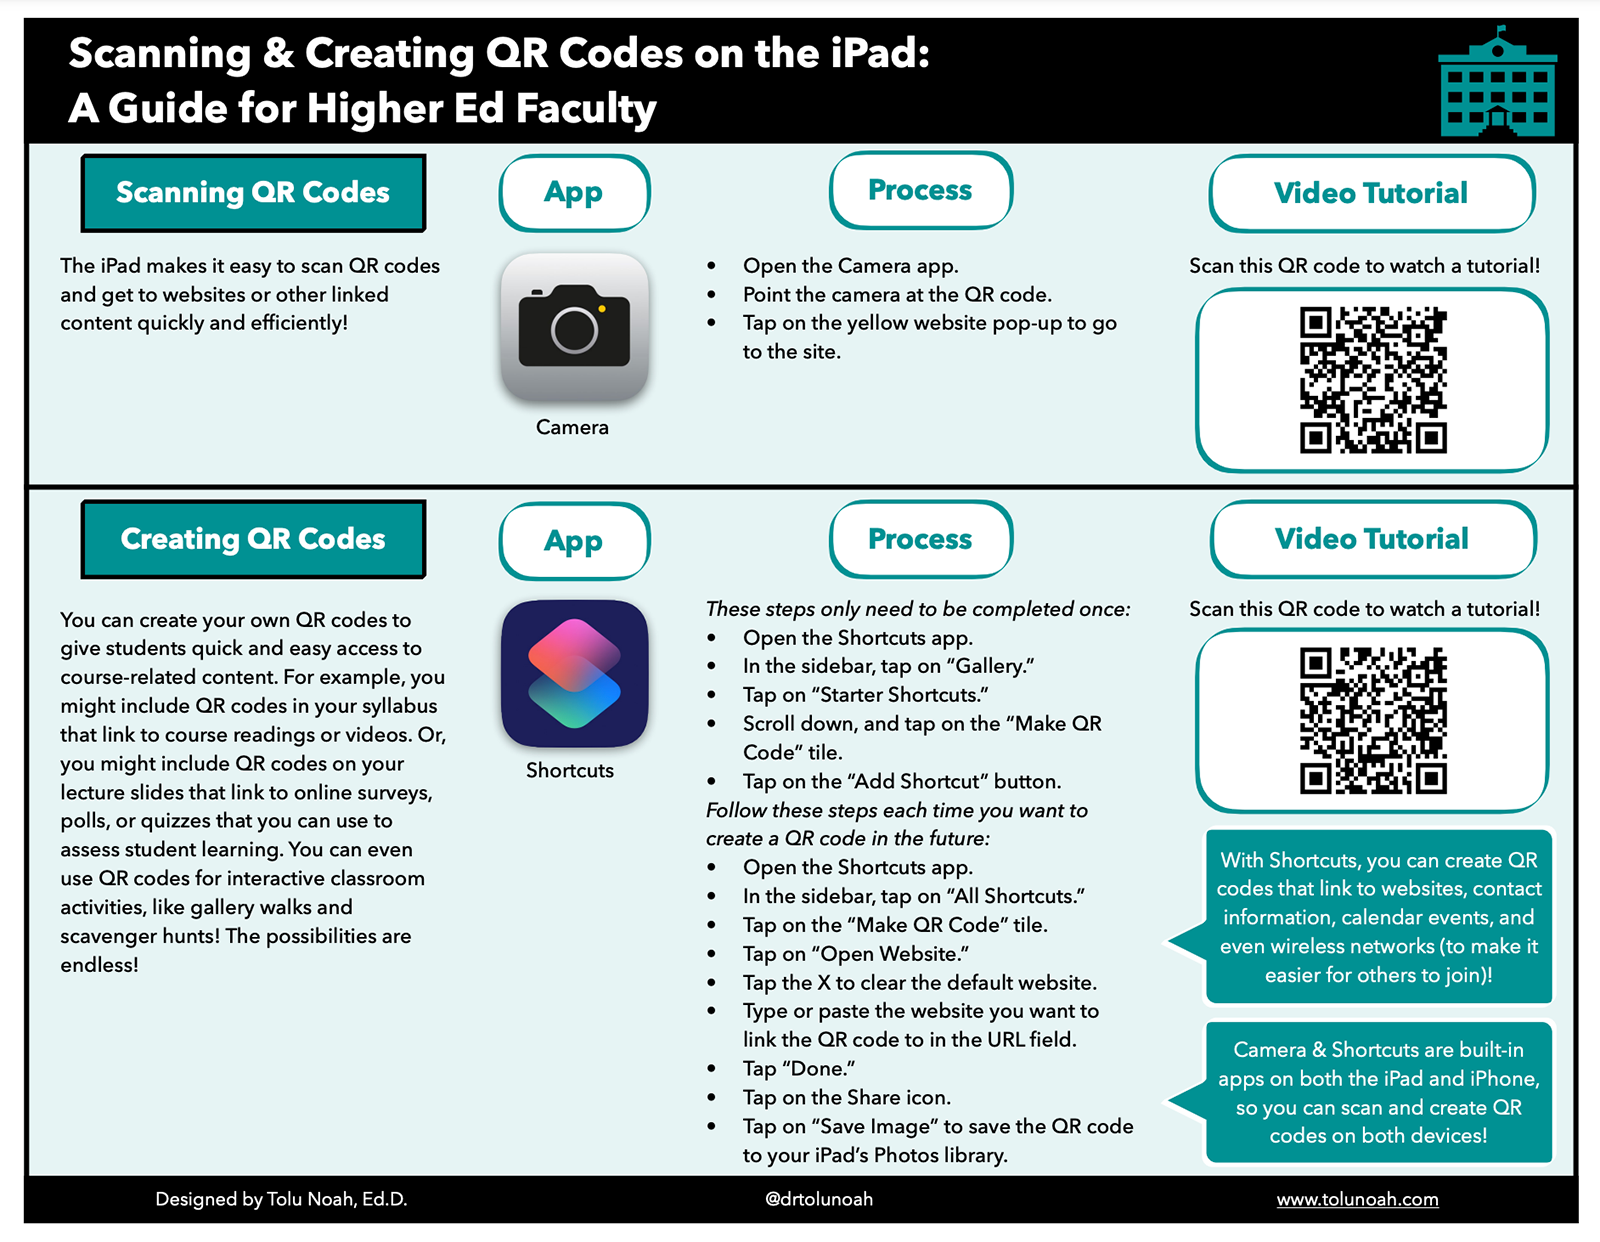 Instructions for scanning and creating QR codes on the iPad